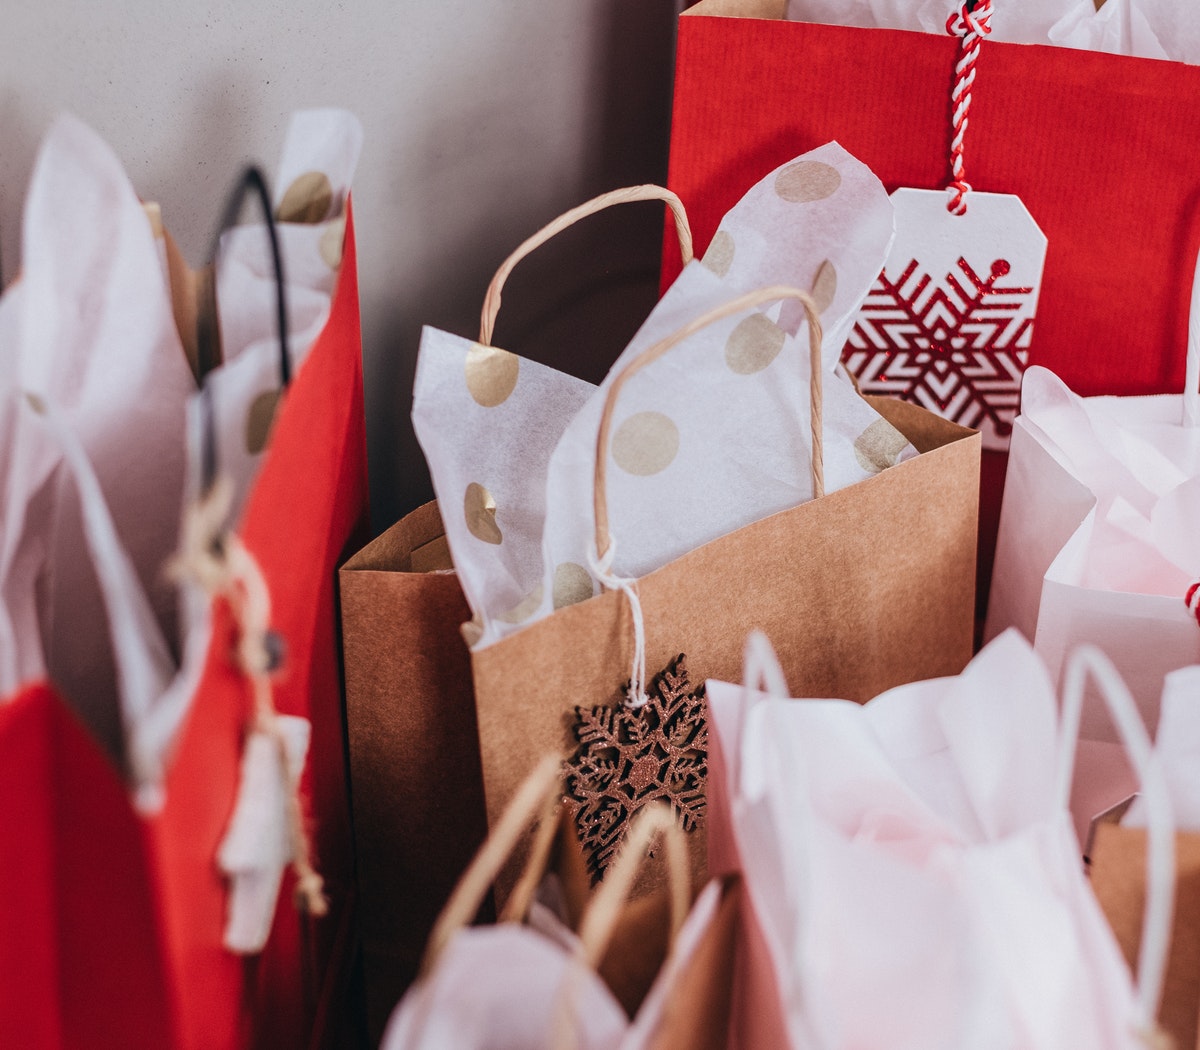 3 Multi-Channel Retailing Secrets to Increase Holiday Sales This Year